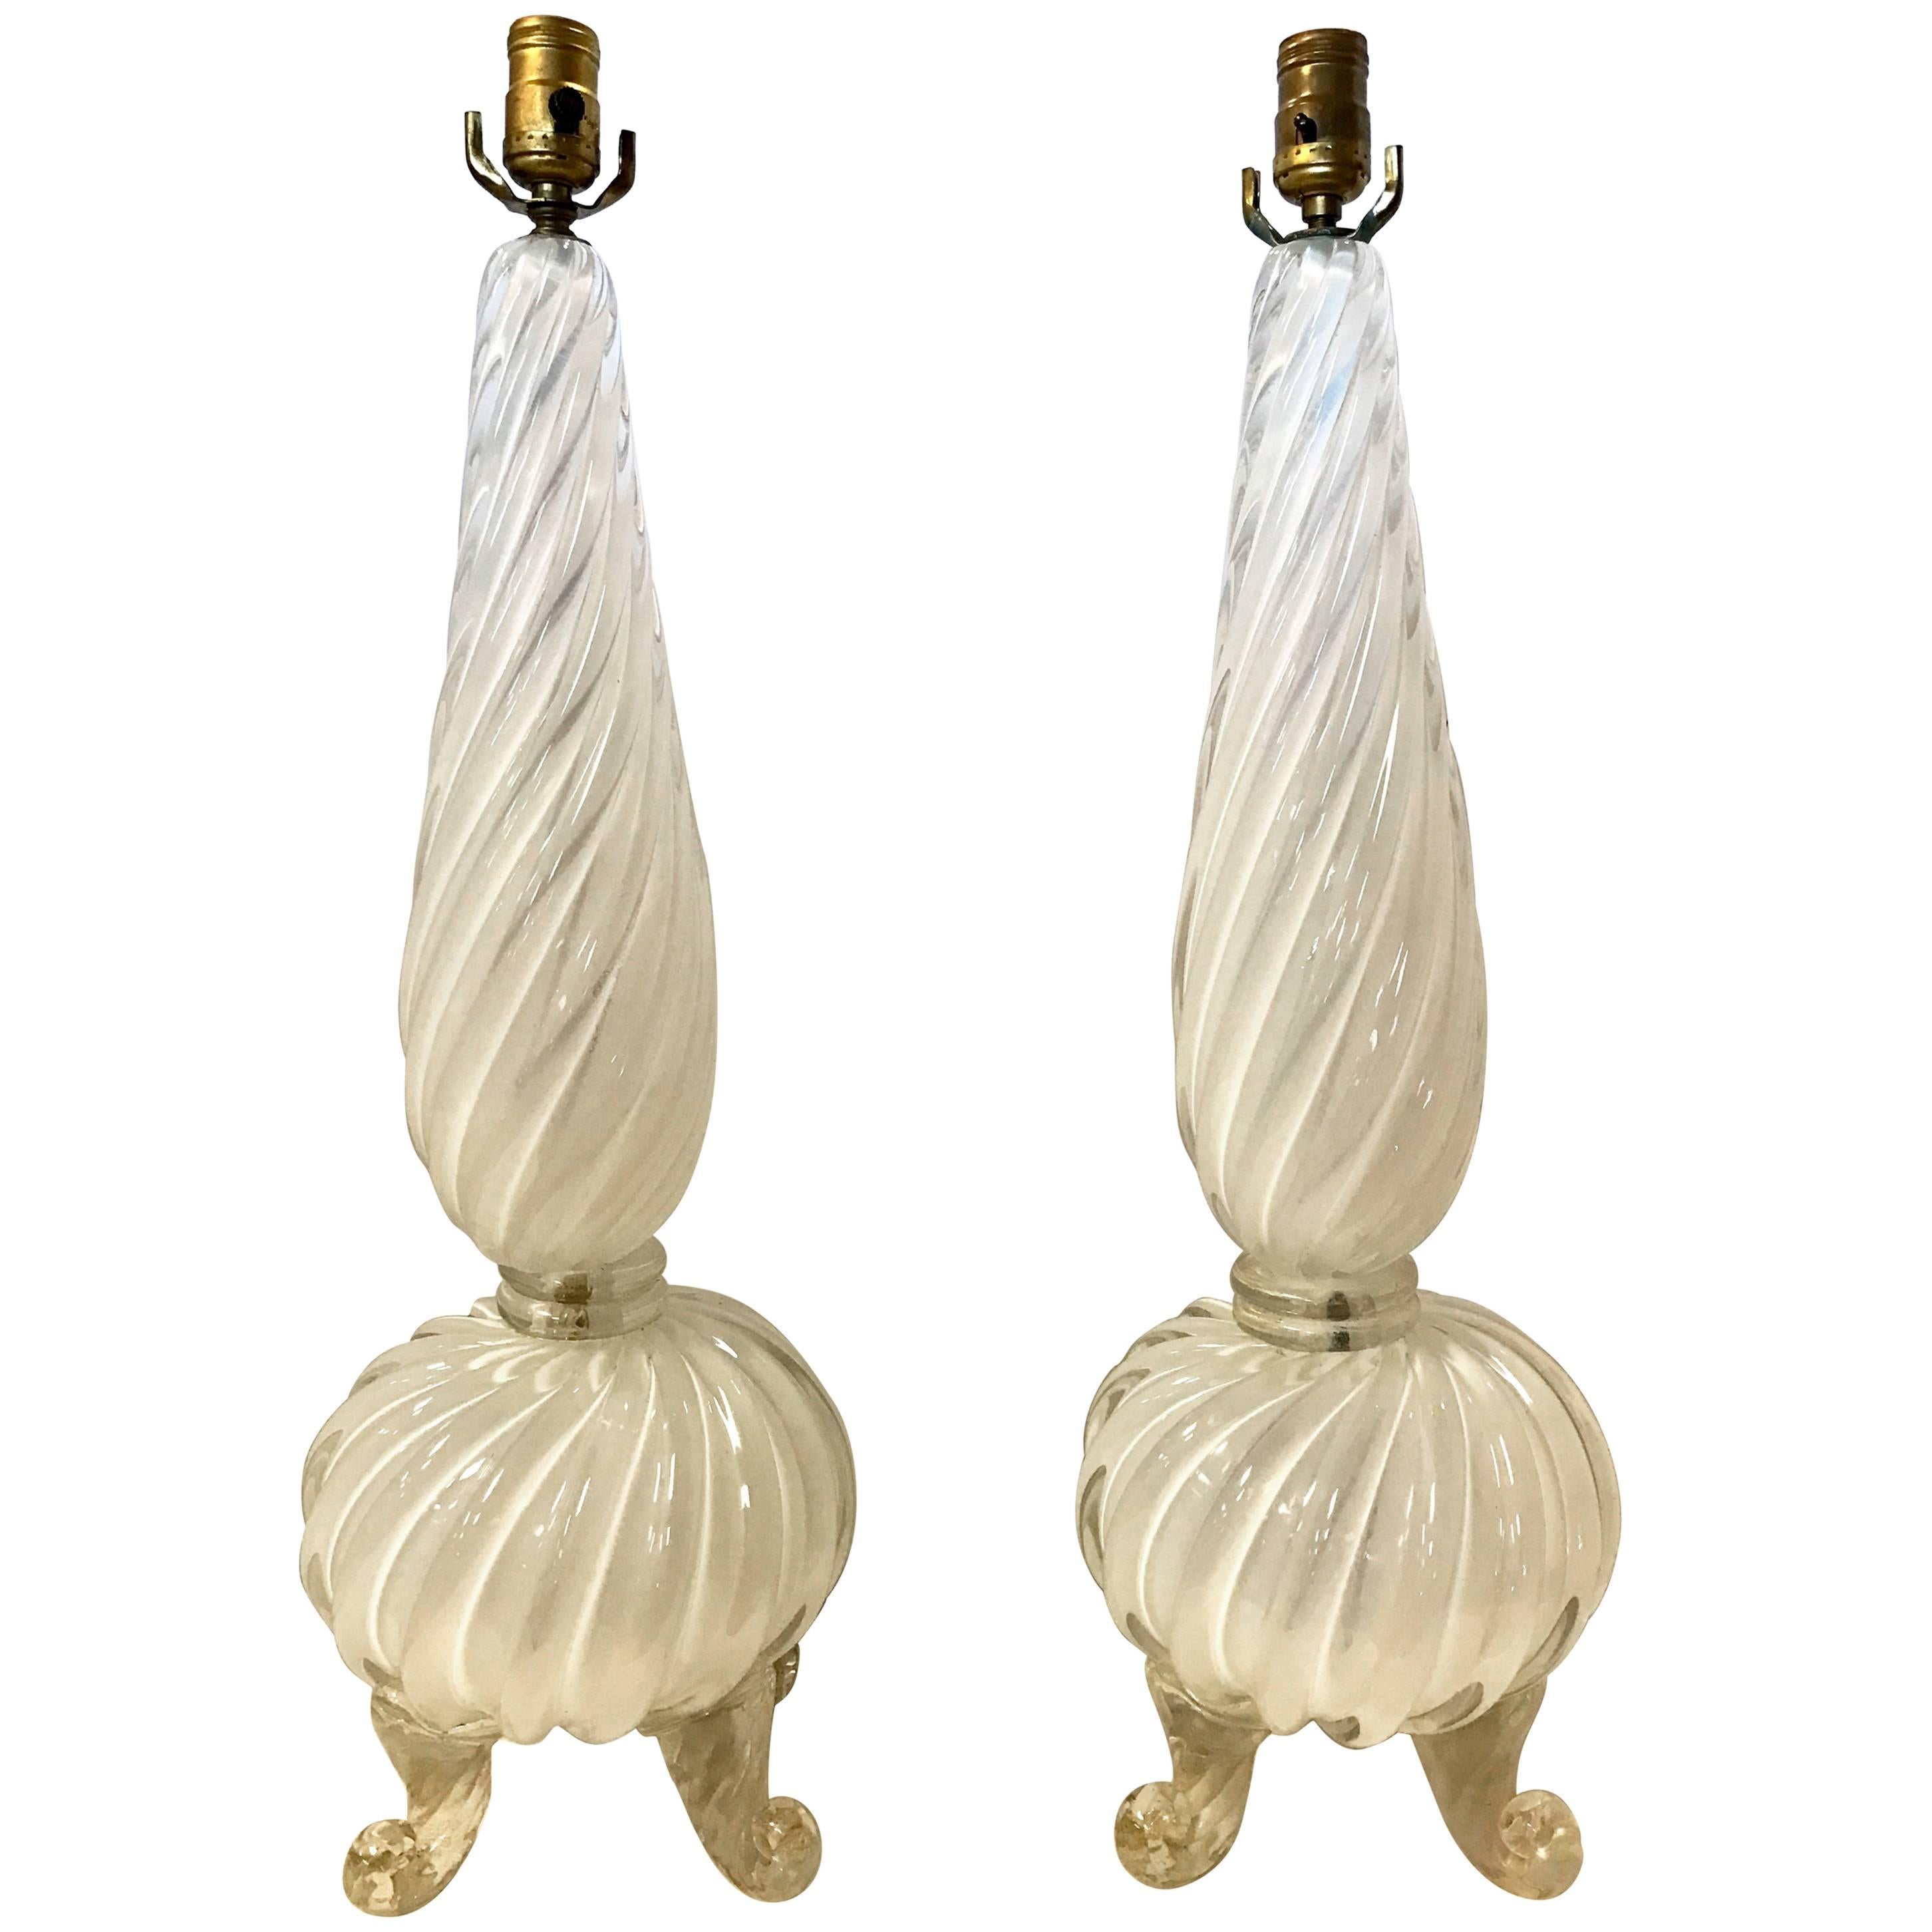 Pair of White and Gold Murano Glass Lamps